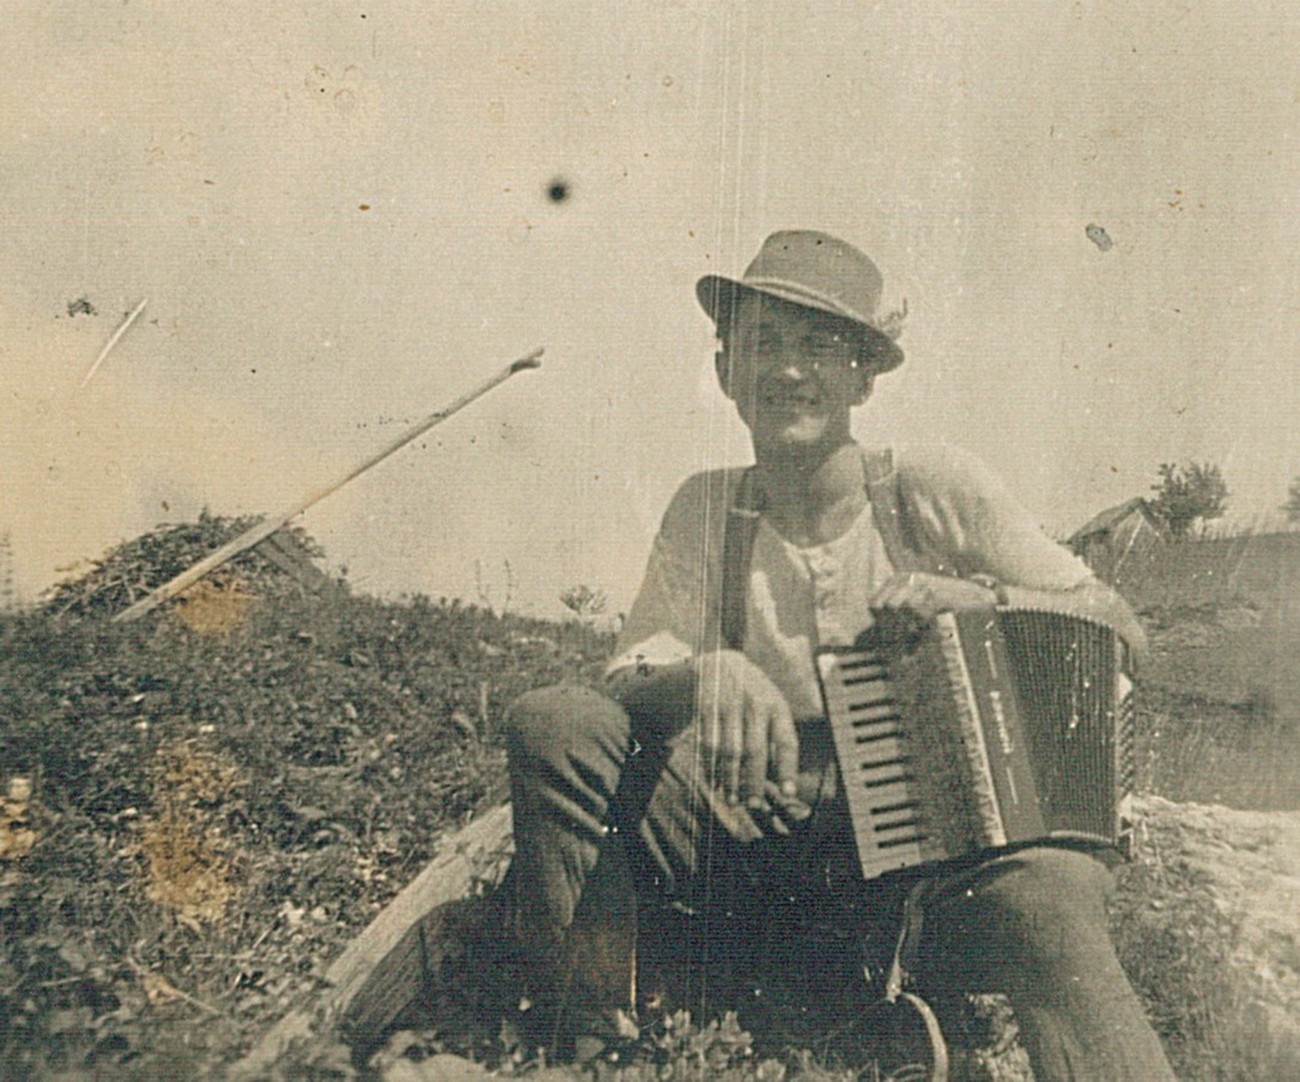 Franc Mikša – Maganatov Francl (in the above picture) lived right next to the Sotla River on the Croatian side of the border. On Easter Sunday in 1944, he was illegally crossing the border using his regular and well-trodden secret passage. He stepped on a newly planted landmine, which caused severe injuries. He spent the next three days dying at his home; in that time, they managed to write down his will. Source: personal archive of Branko Mikša.